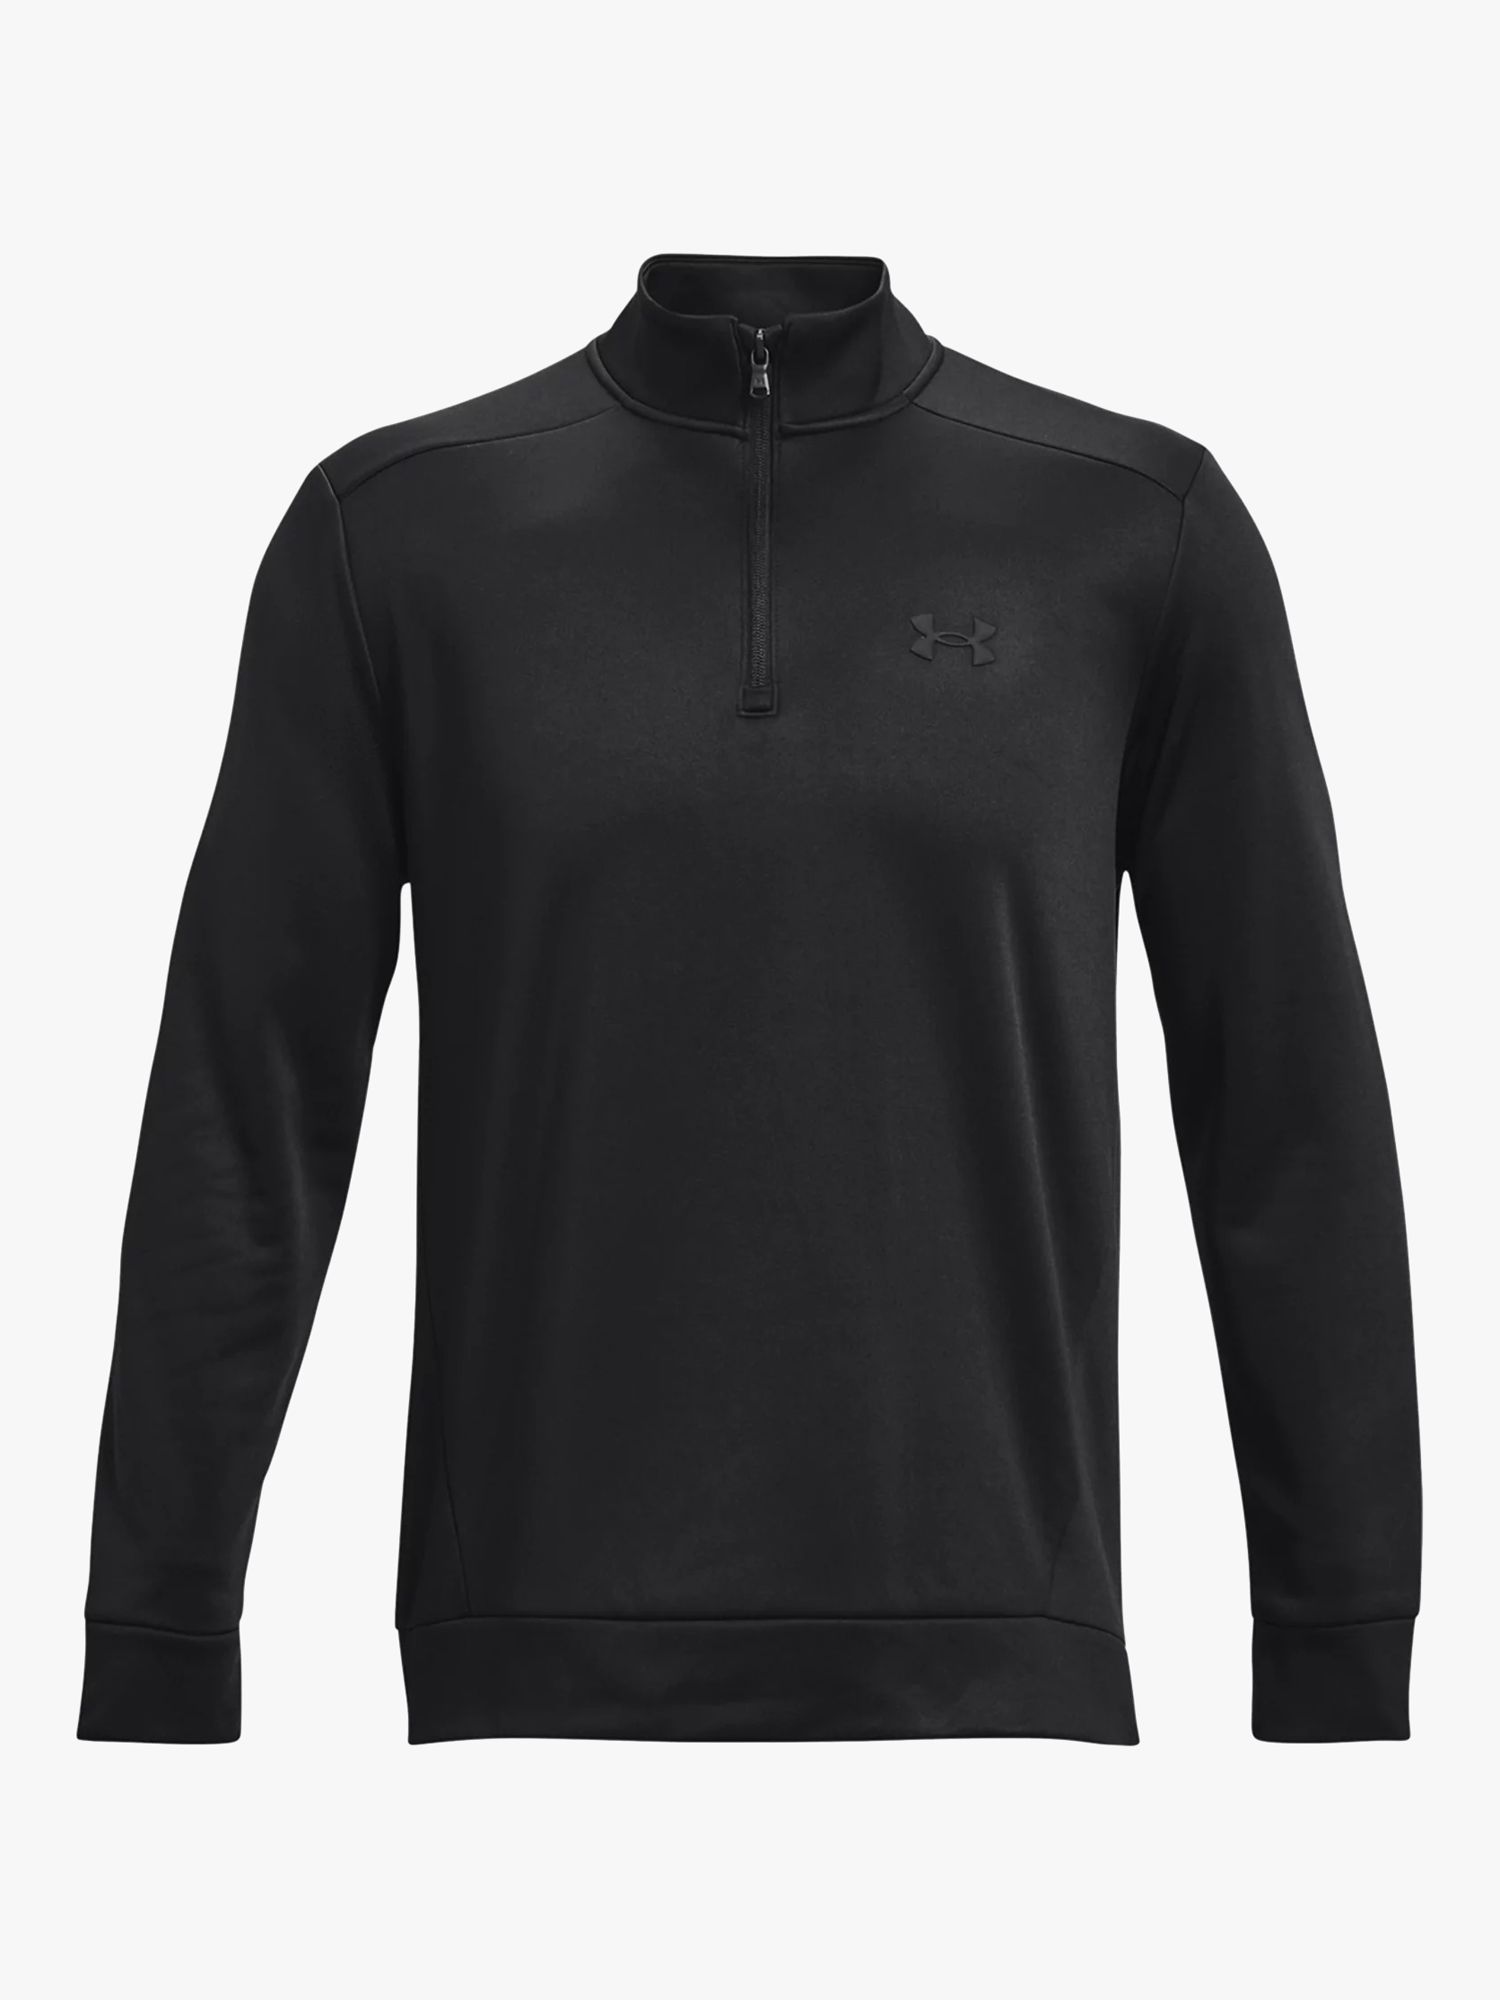 Under Armour UA Train Cold Weather Funnel Neck Long Sleeve Shirt Women -  White/Black